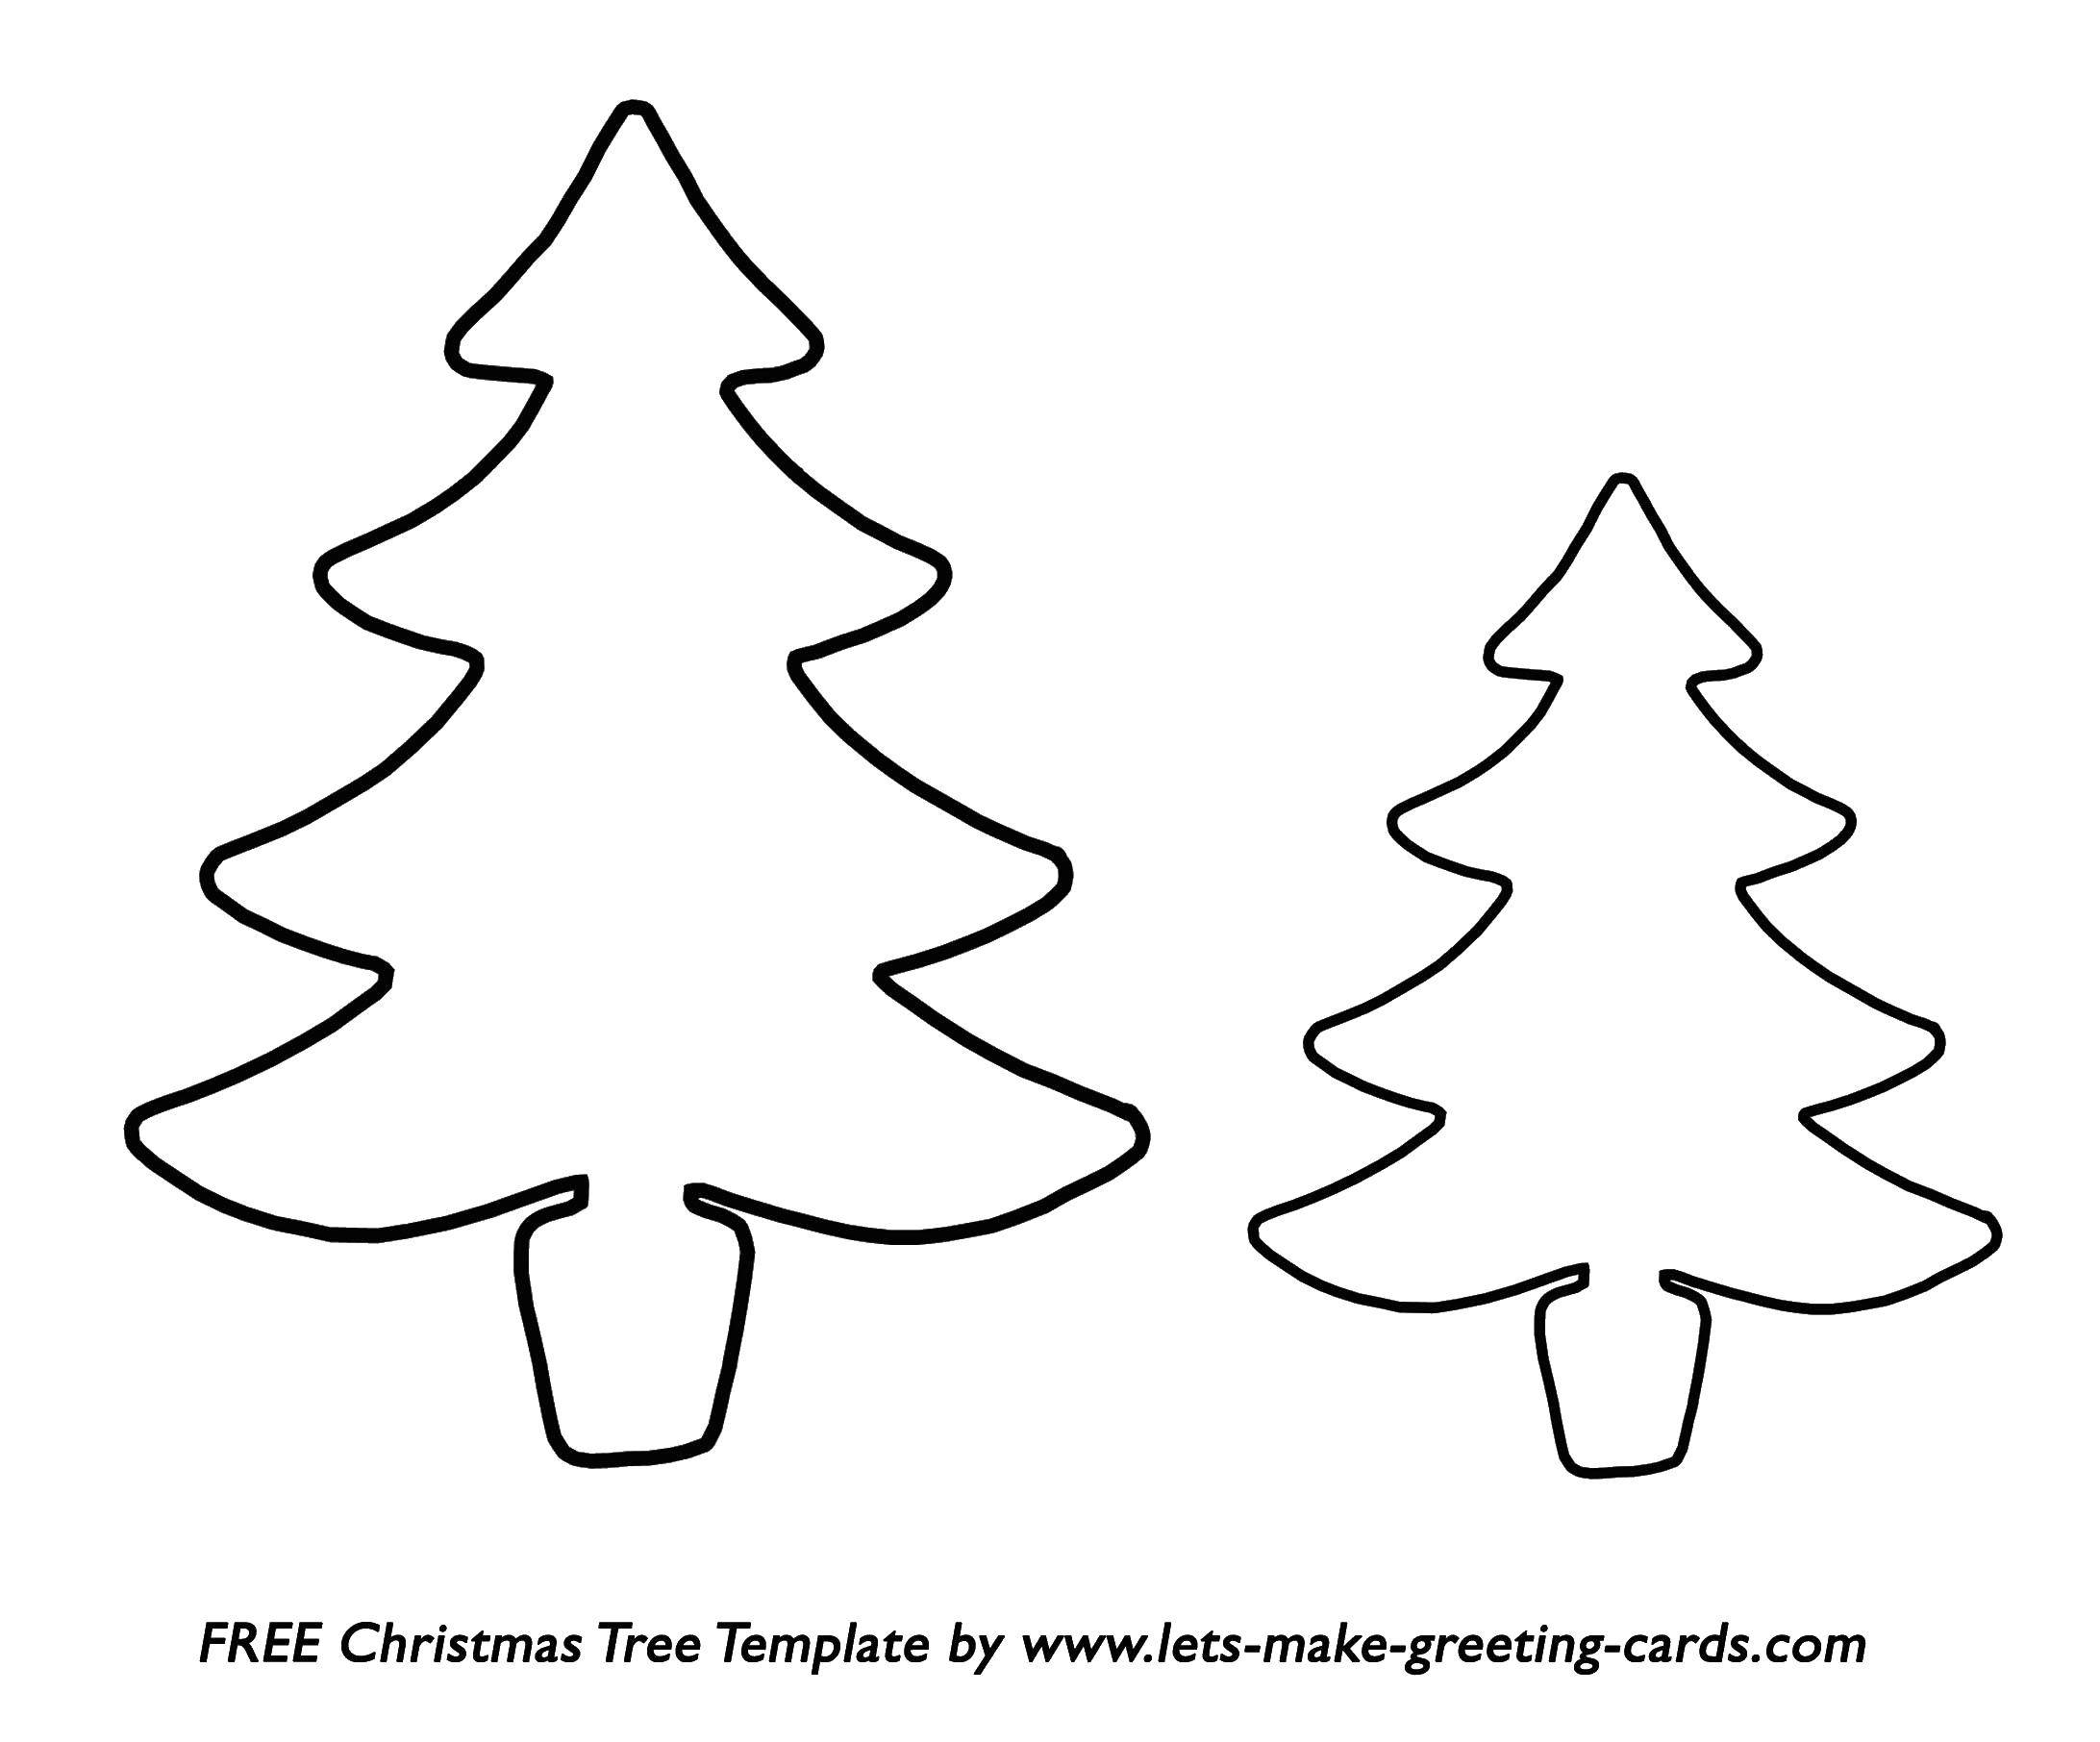 Coloring Two fir trees. Category The contour of the tree. Tags:  outlines, templates, spruce.